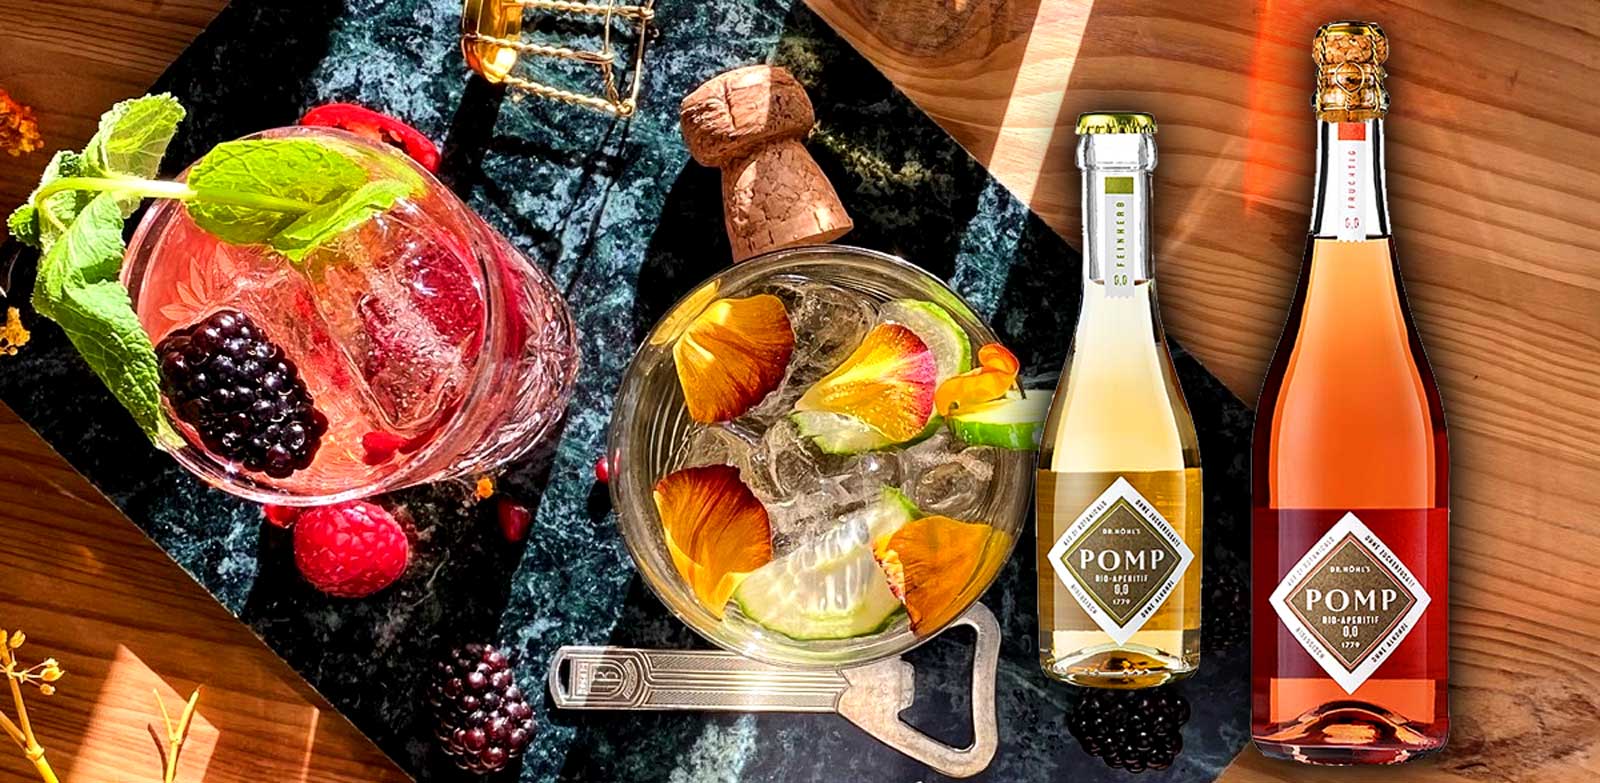 Secco, sparkling wine, cider Enjoyment and well-being around apples - that has been our family mission at Dr.Hohl`s for over 240 years
The unique Pomp Cuvee made from Riesling sparkling wine and Champagne Reinette